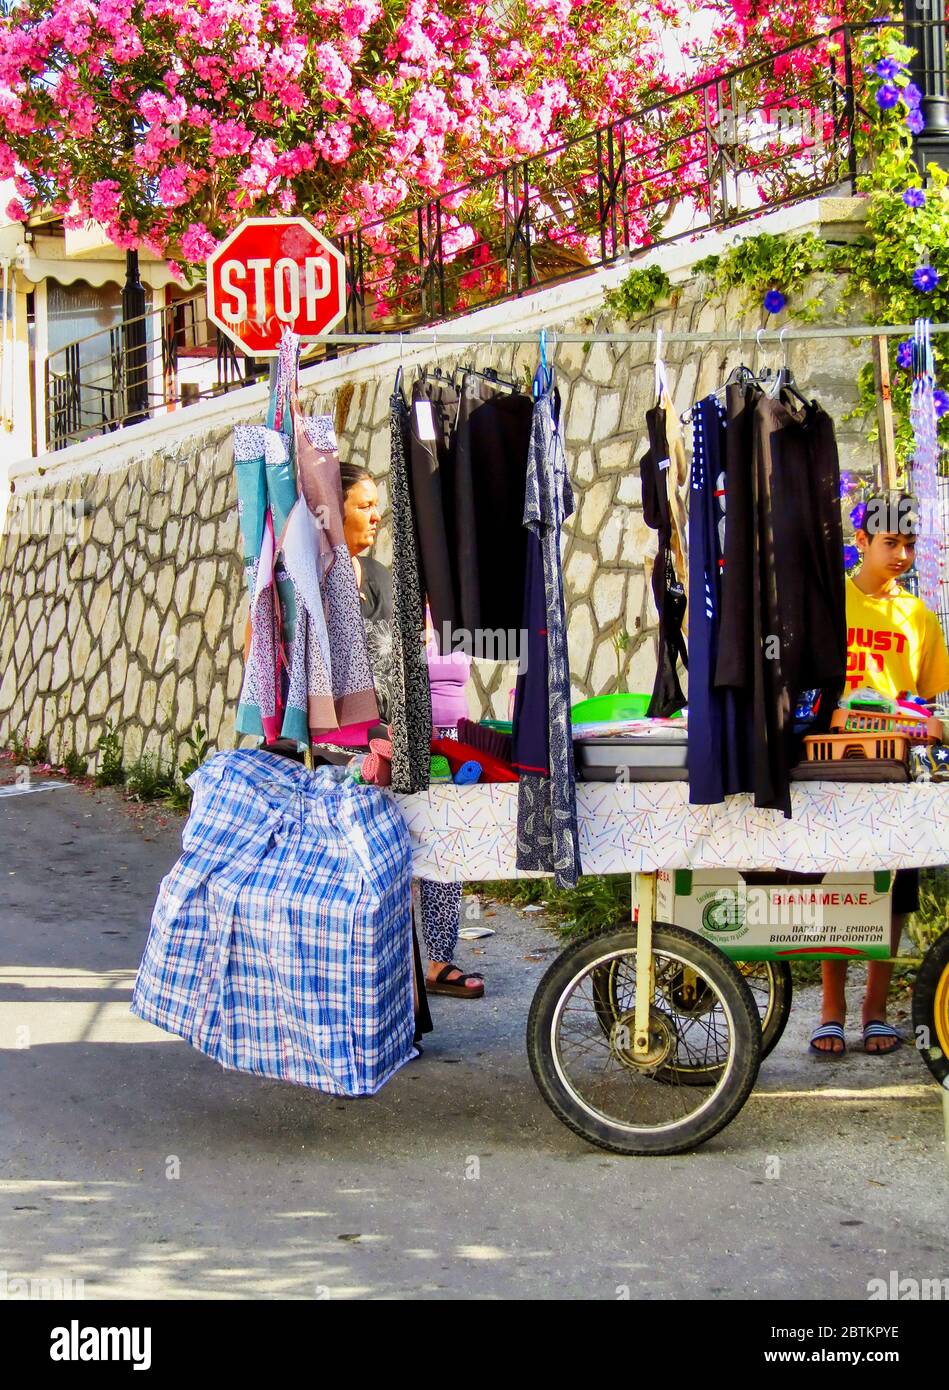 Old Fashioned Street Vender with Mobile Cart and Clothing, Crete, Greece  Stock Photo - Alamy